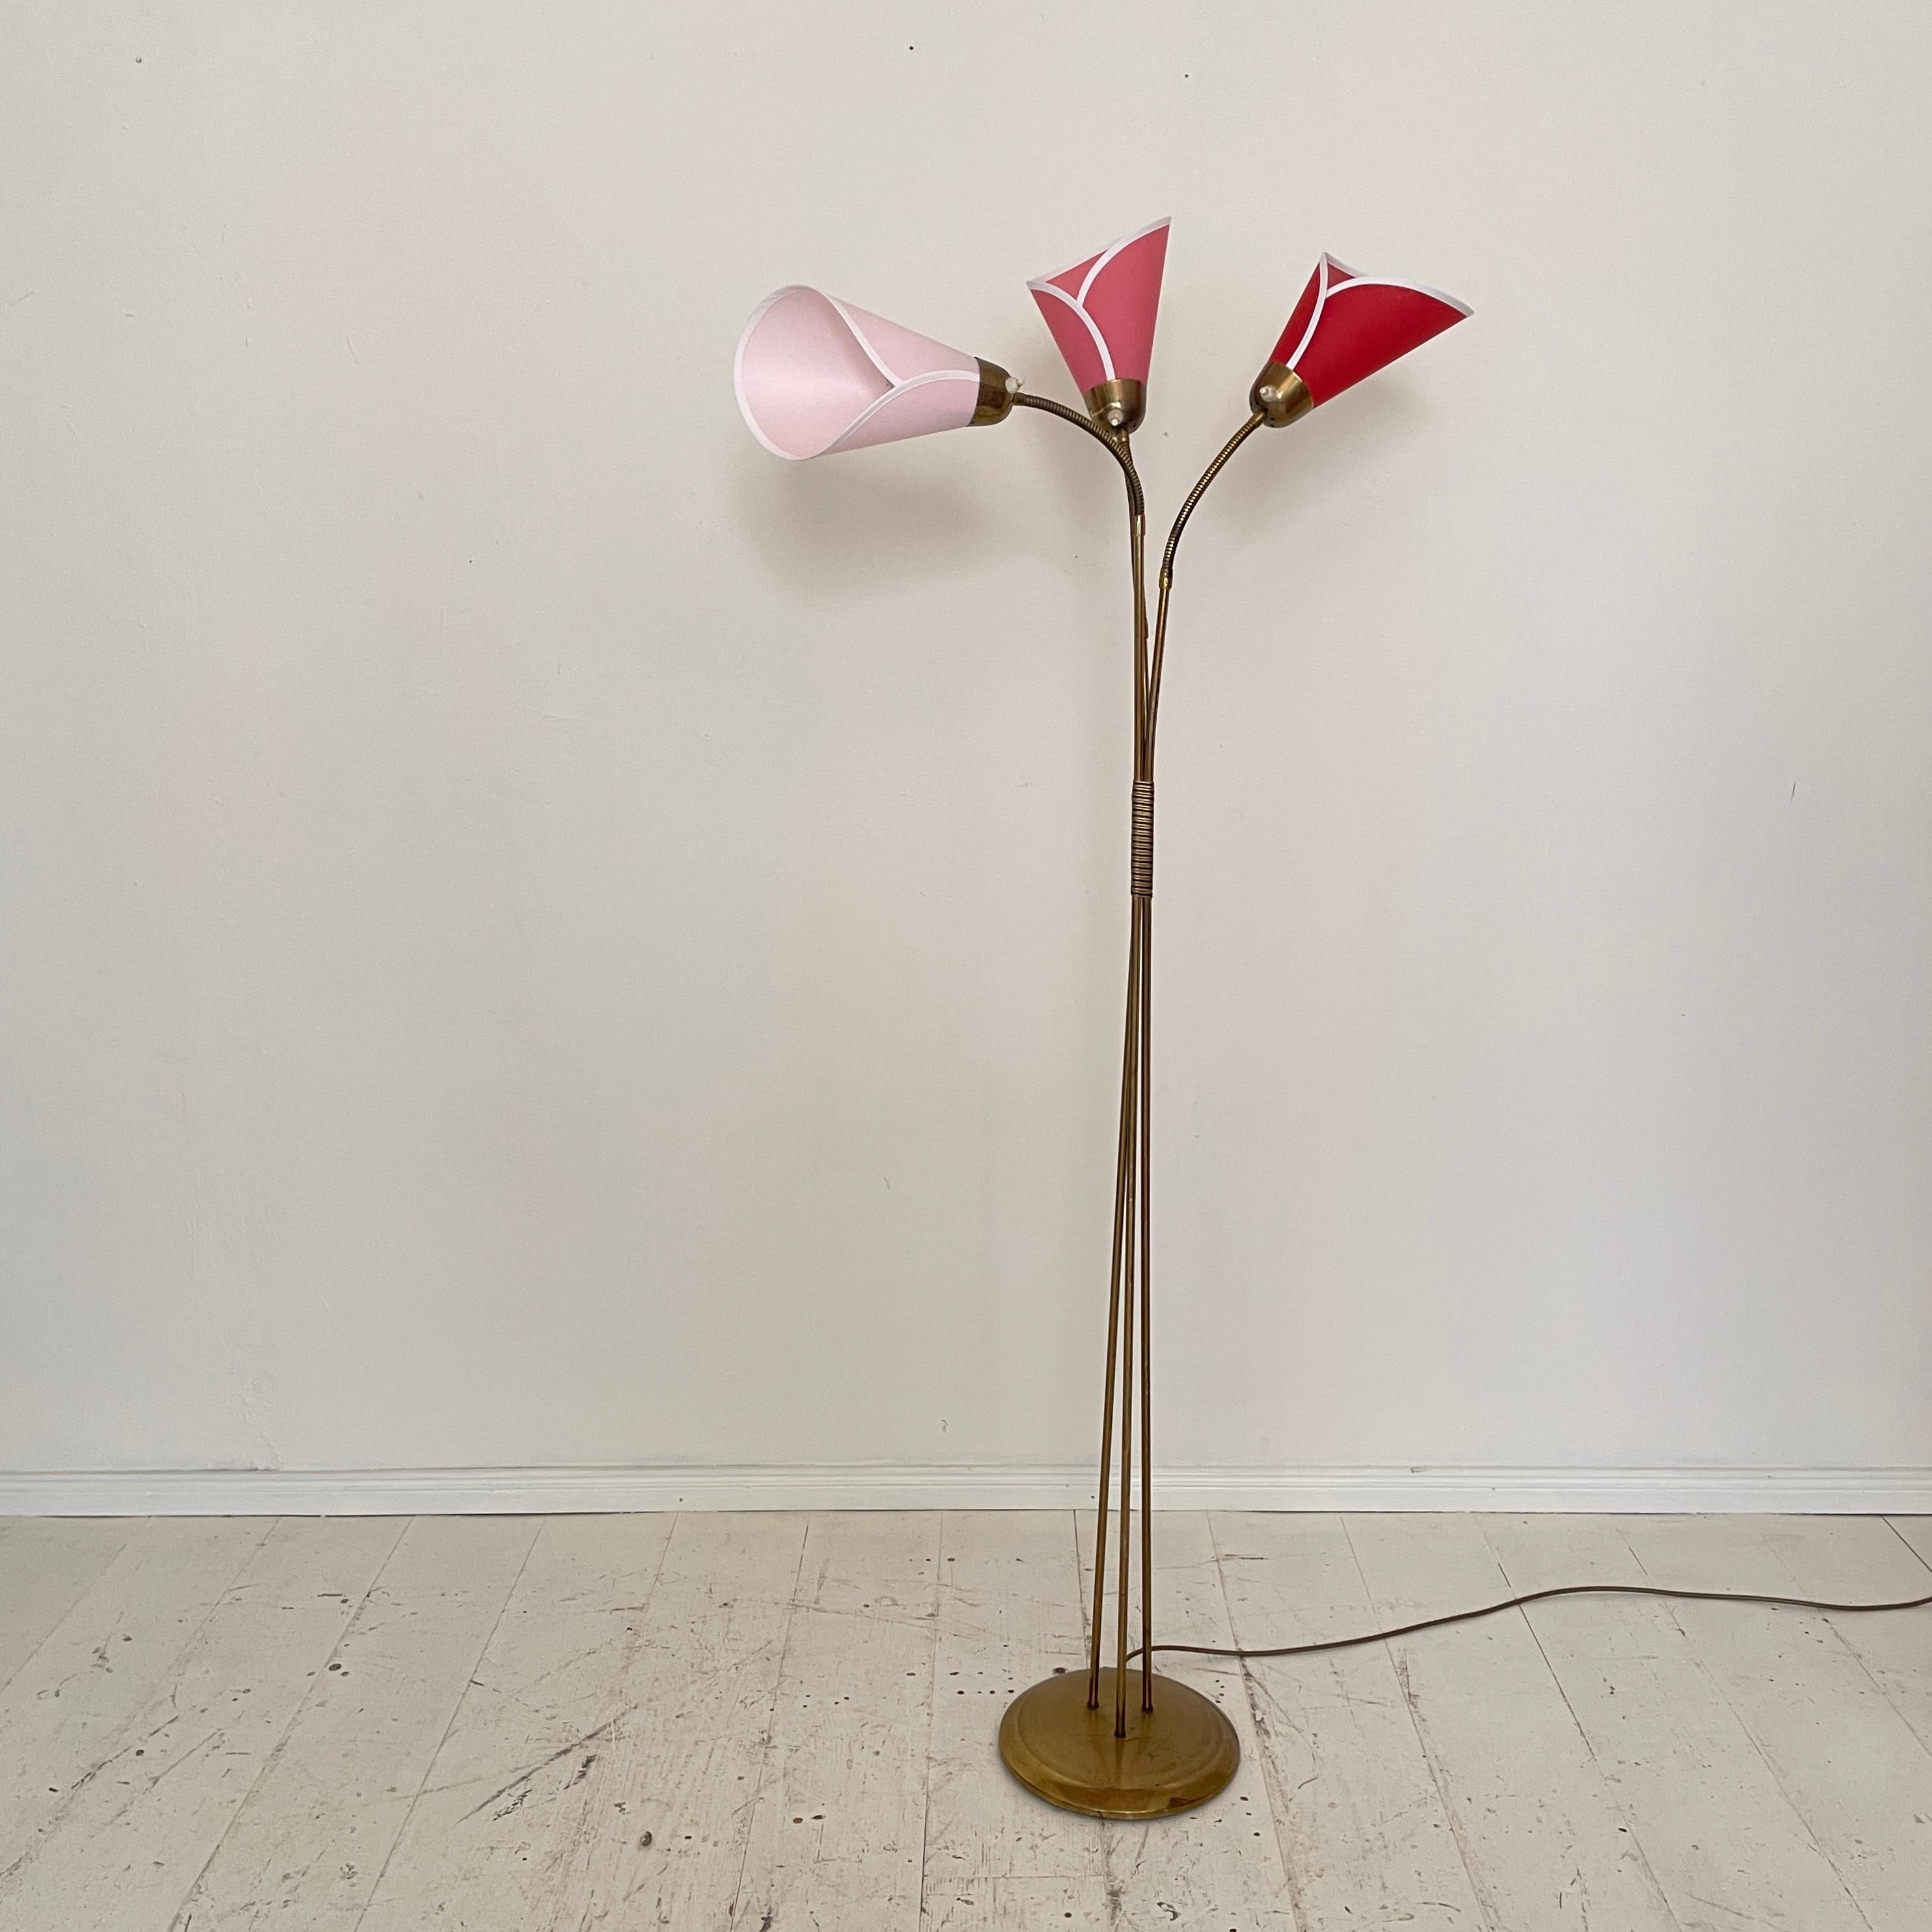 This elegant Mid-Century Floor Lamp in Brass was designed and made around 1952 in Germany.
The lamp has got three movable arms which you can move in any direction. Also each arm has its own light switch. The re-done fabric shades come in three